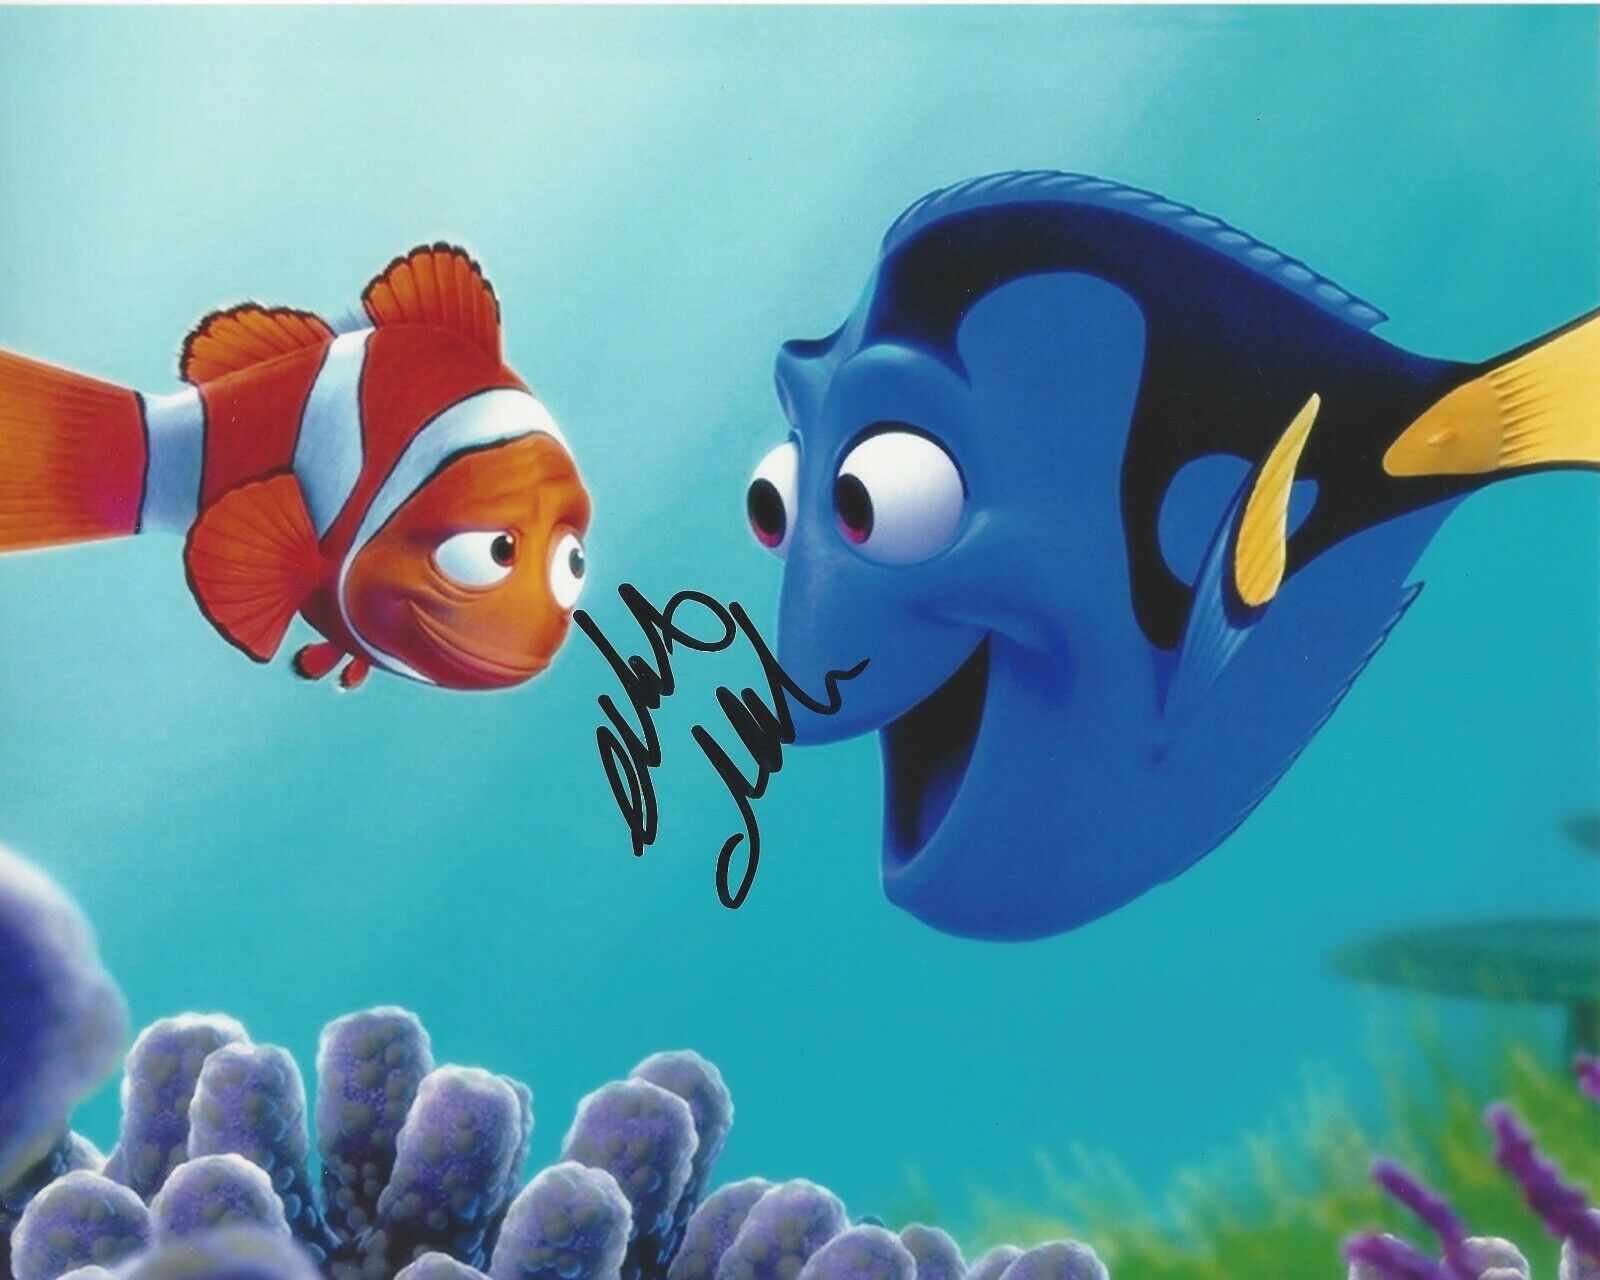 ALBERT BROOKS SIGNED 'FINDING NEMO' 8x10 MOVIE Photo Poster painting w/COA VOICE ACTOR COMEDIAN